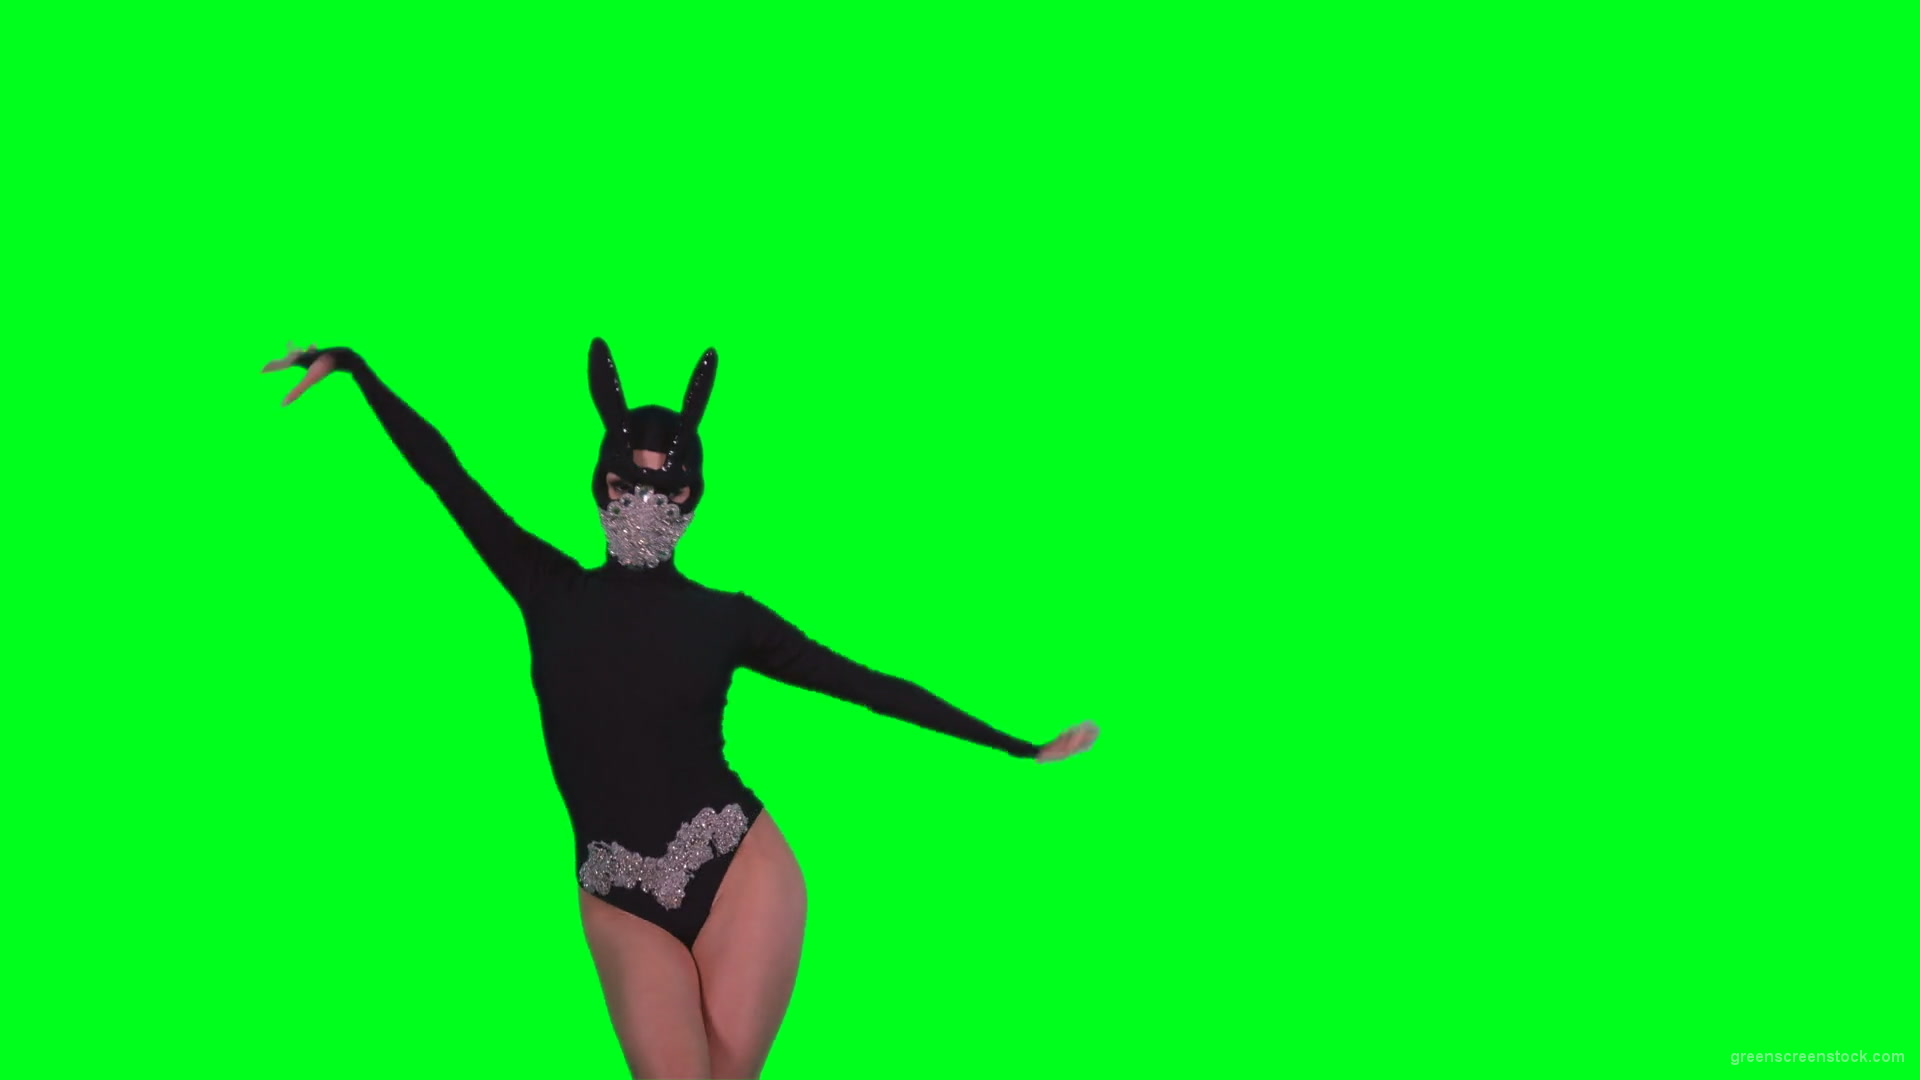 Sexy-bunny-girl-dance-performs-in-rabbit-costume-on-green-screen-4K-Video-Footage-1920_002 Green Screen Stock